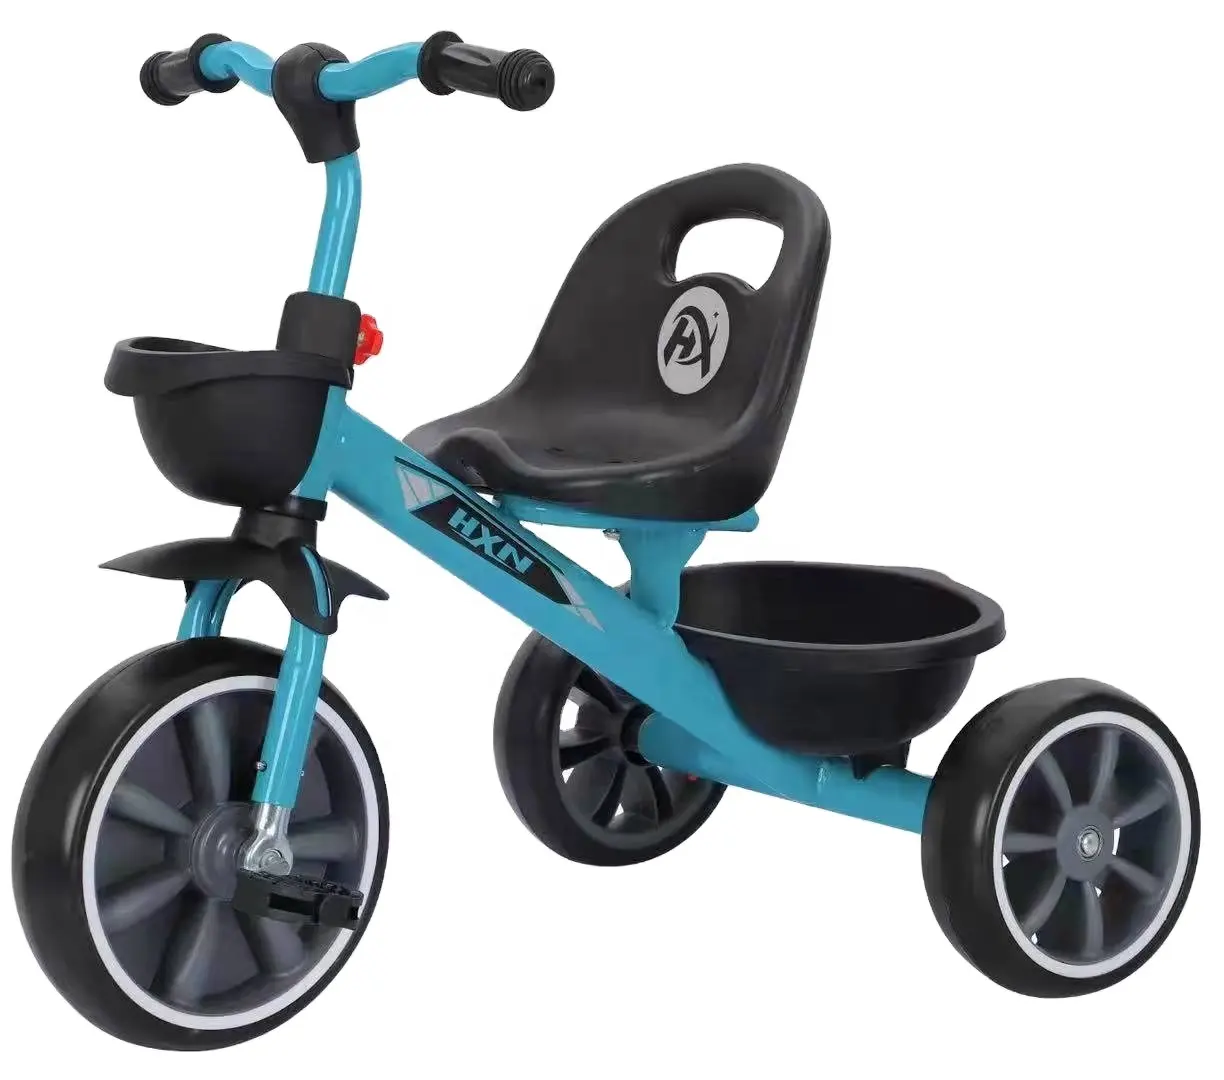 Online shopping low price children toys Christmas gifts for kids steel frame baby tricycle kids toys